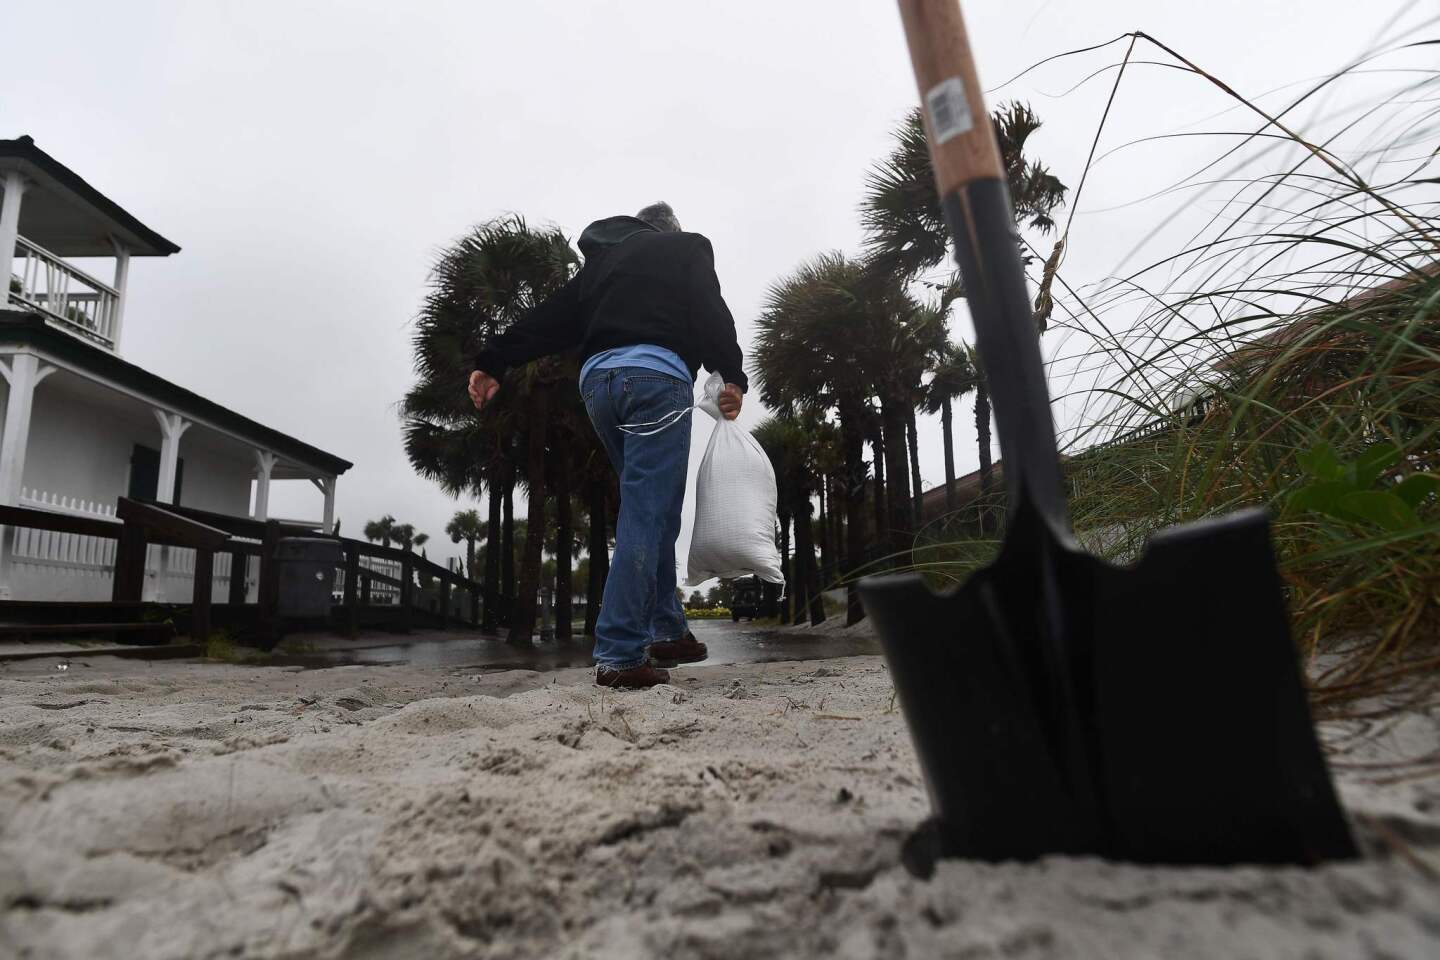 A local resident collects sand in a bag from the Neptune beach to use for flood protection at his house ahead of hurricane Matthew in Jacksonville, Florida on Oct. 6, 2016.